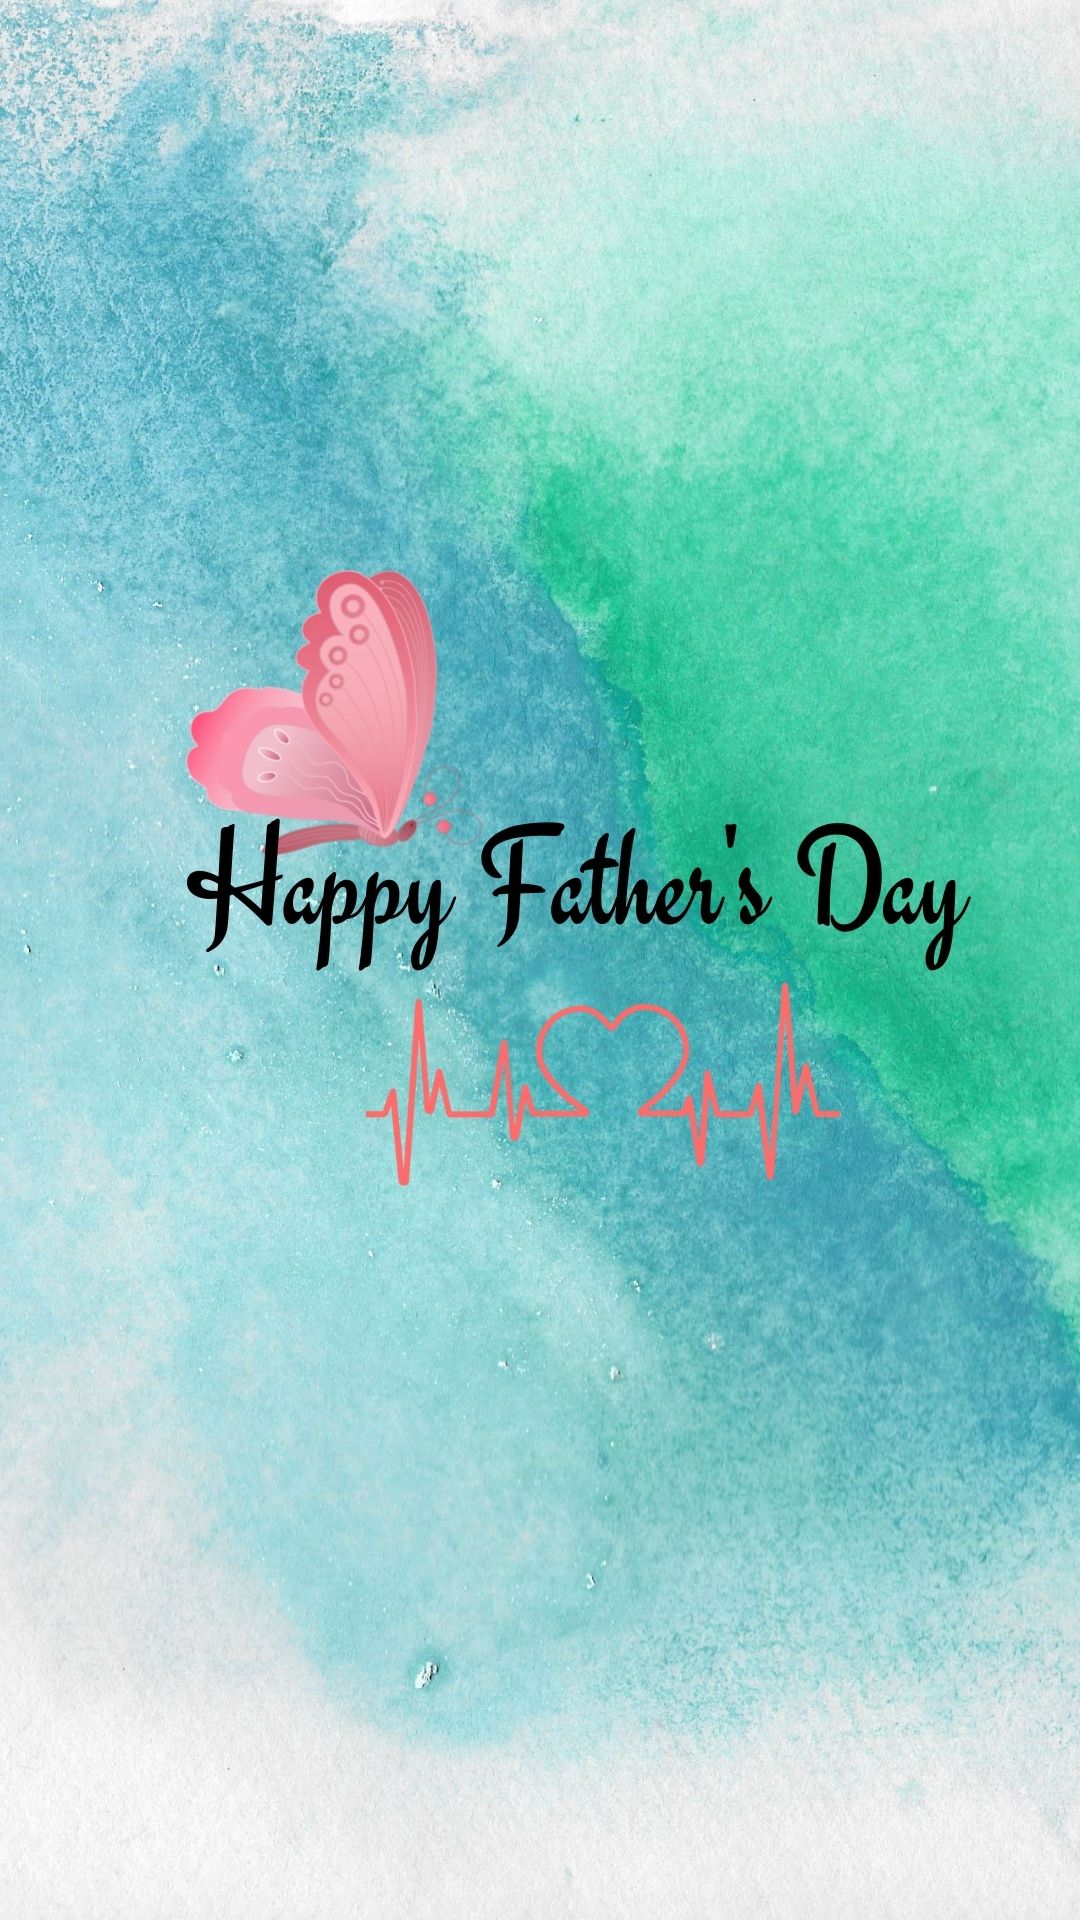 best happy father's day wishes images for instagram story (29)